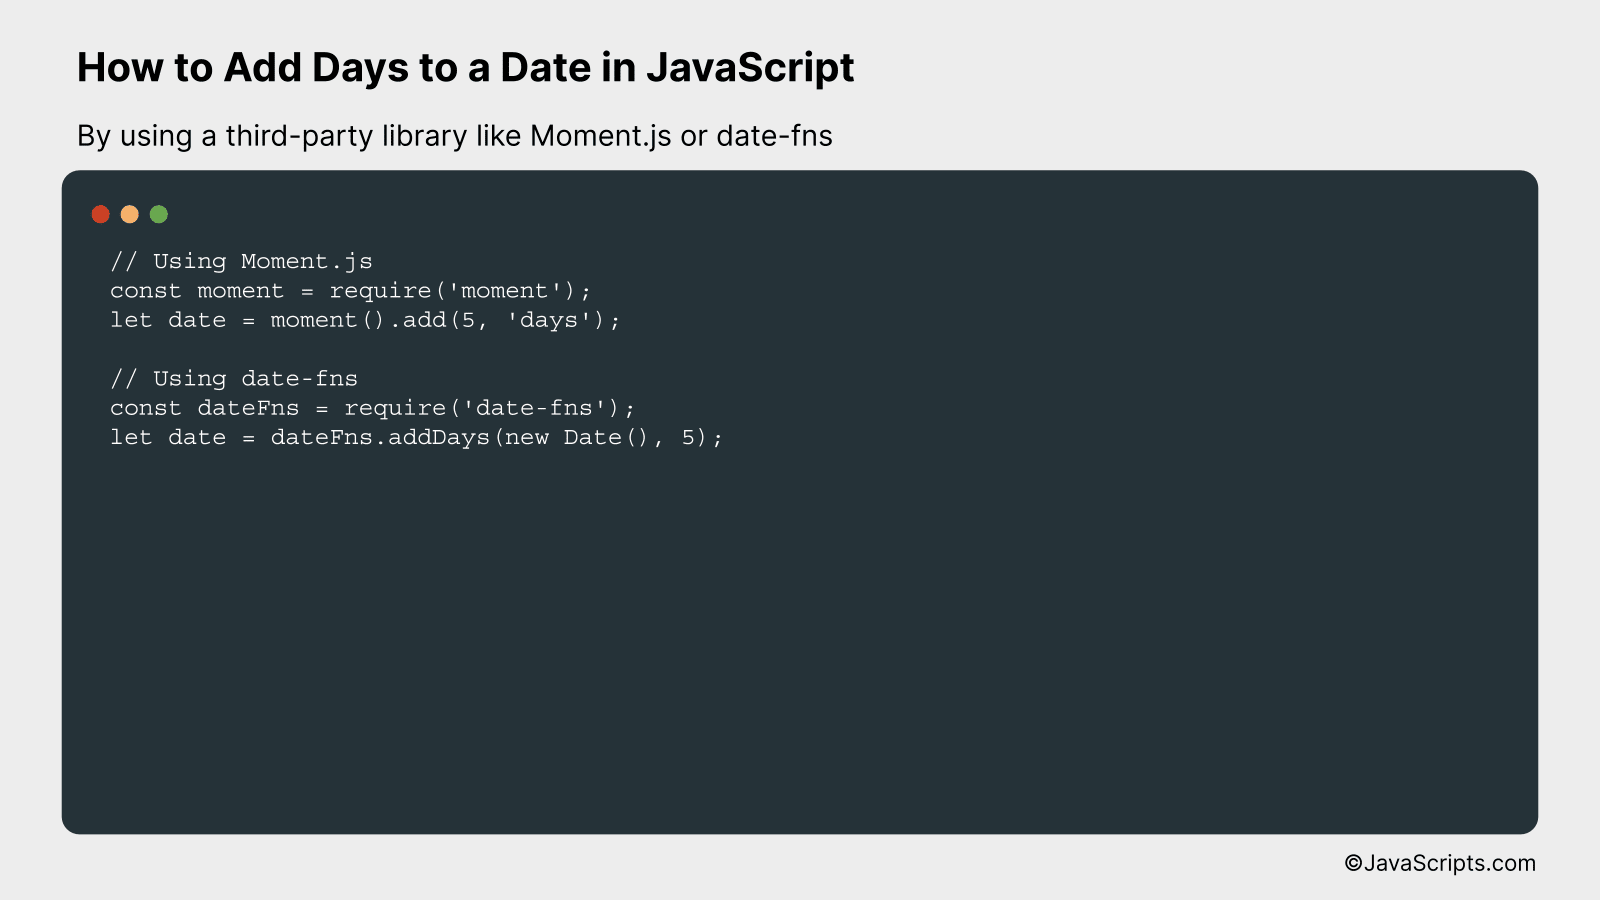 By using a third-party library like Moment.js or date-fns